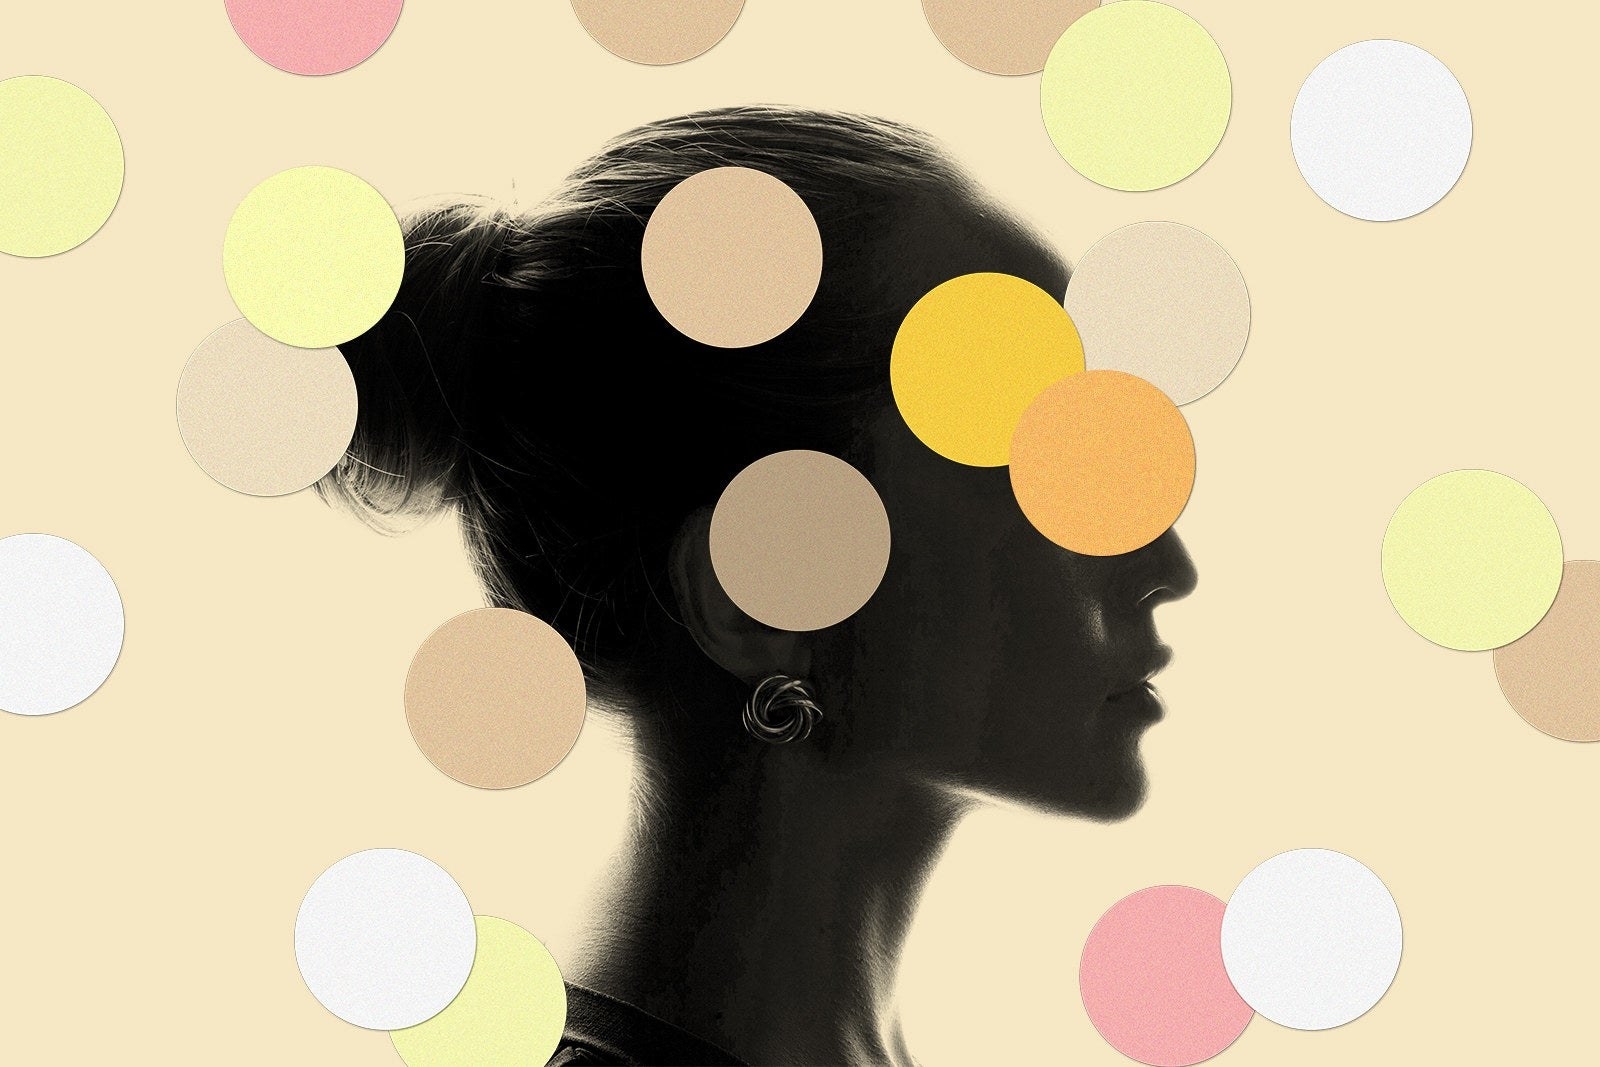 the darkened side profile of a woman&#x27;s face covered in netural polka dots